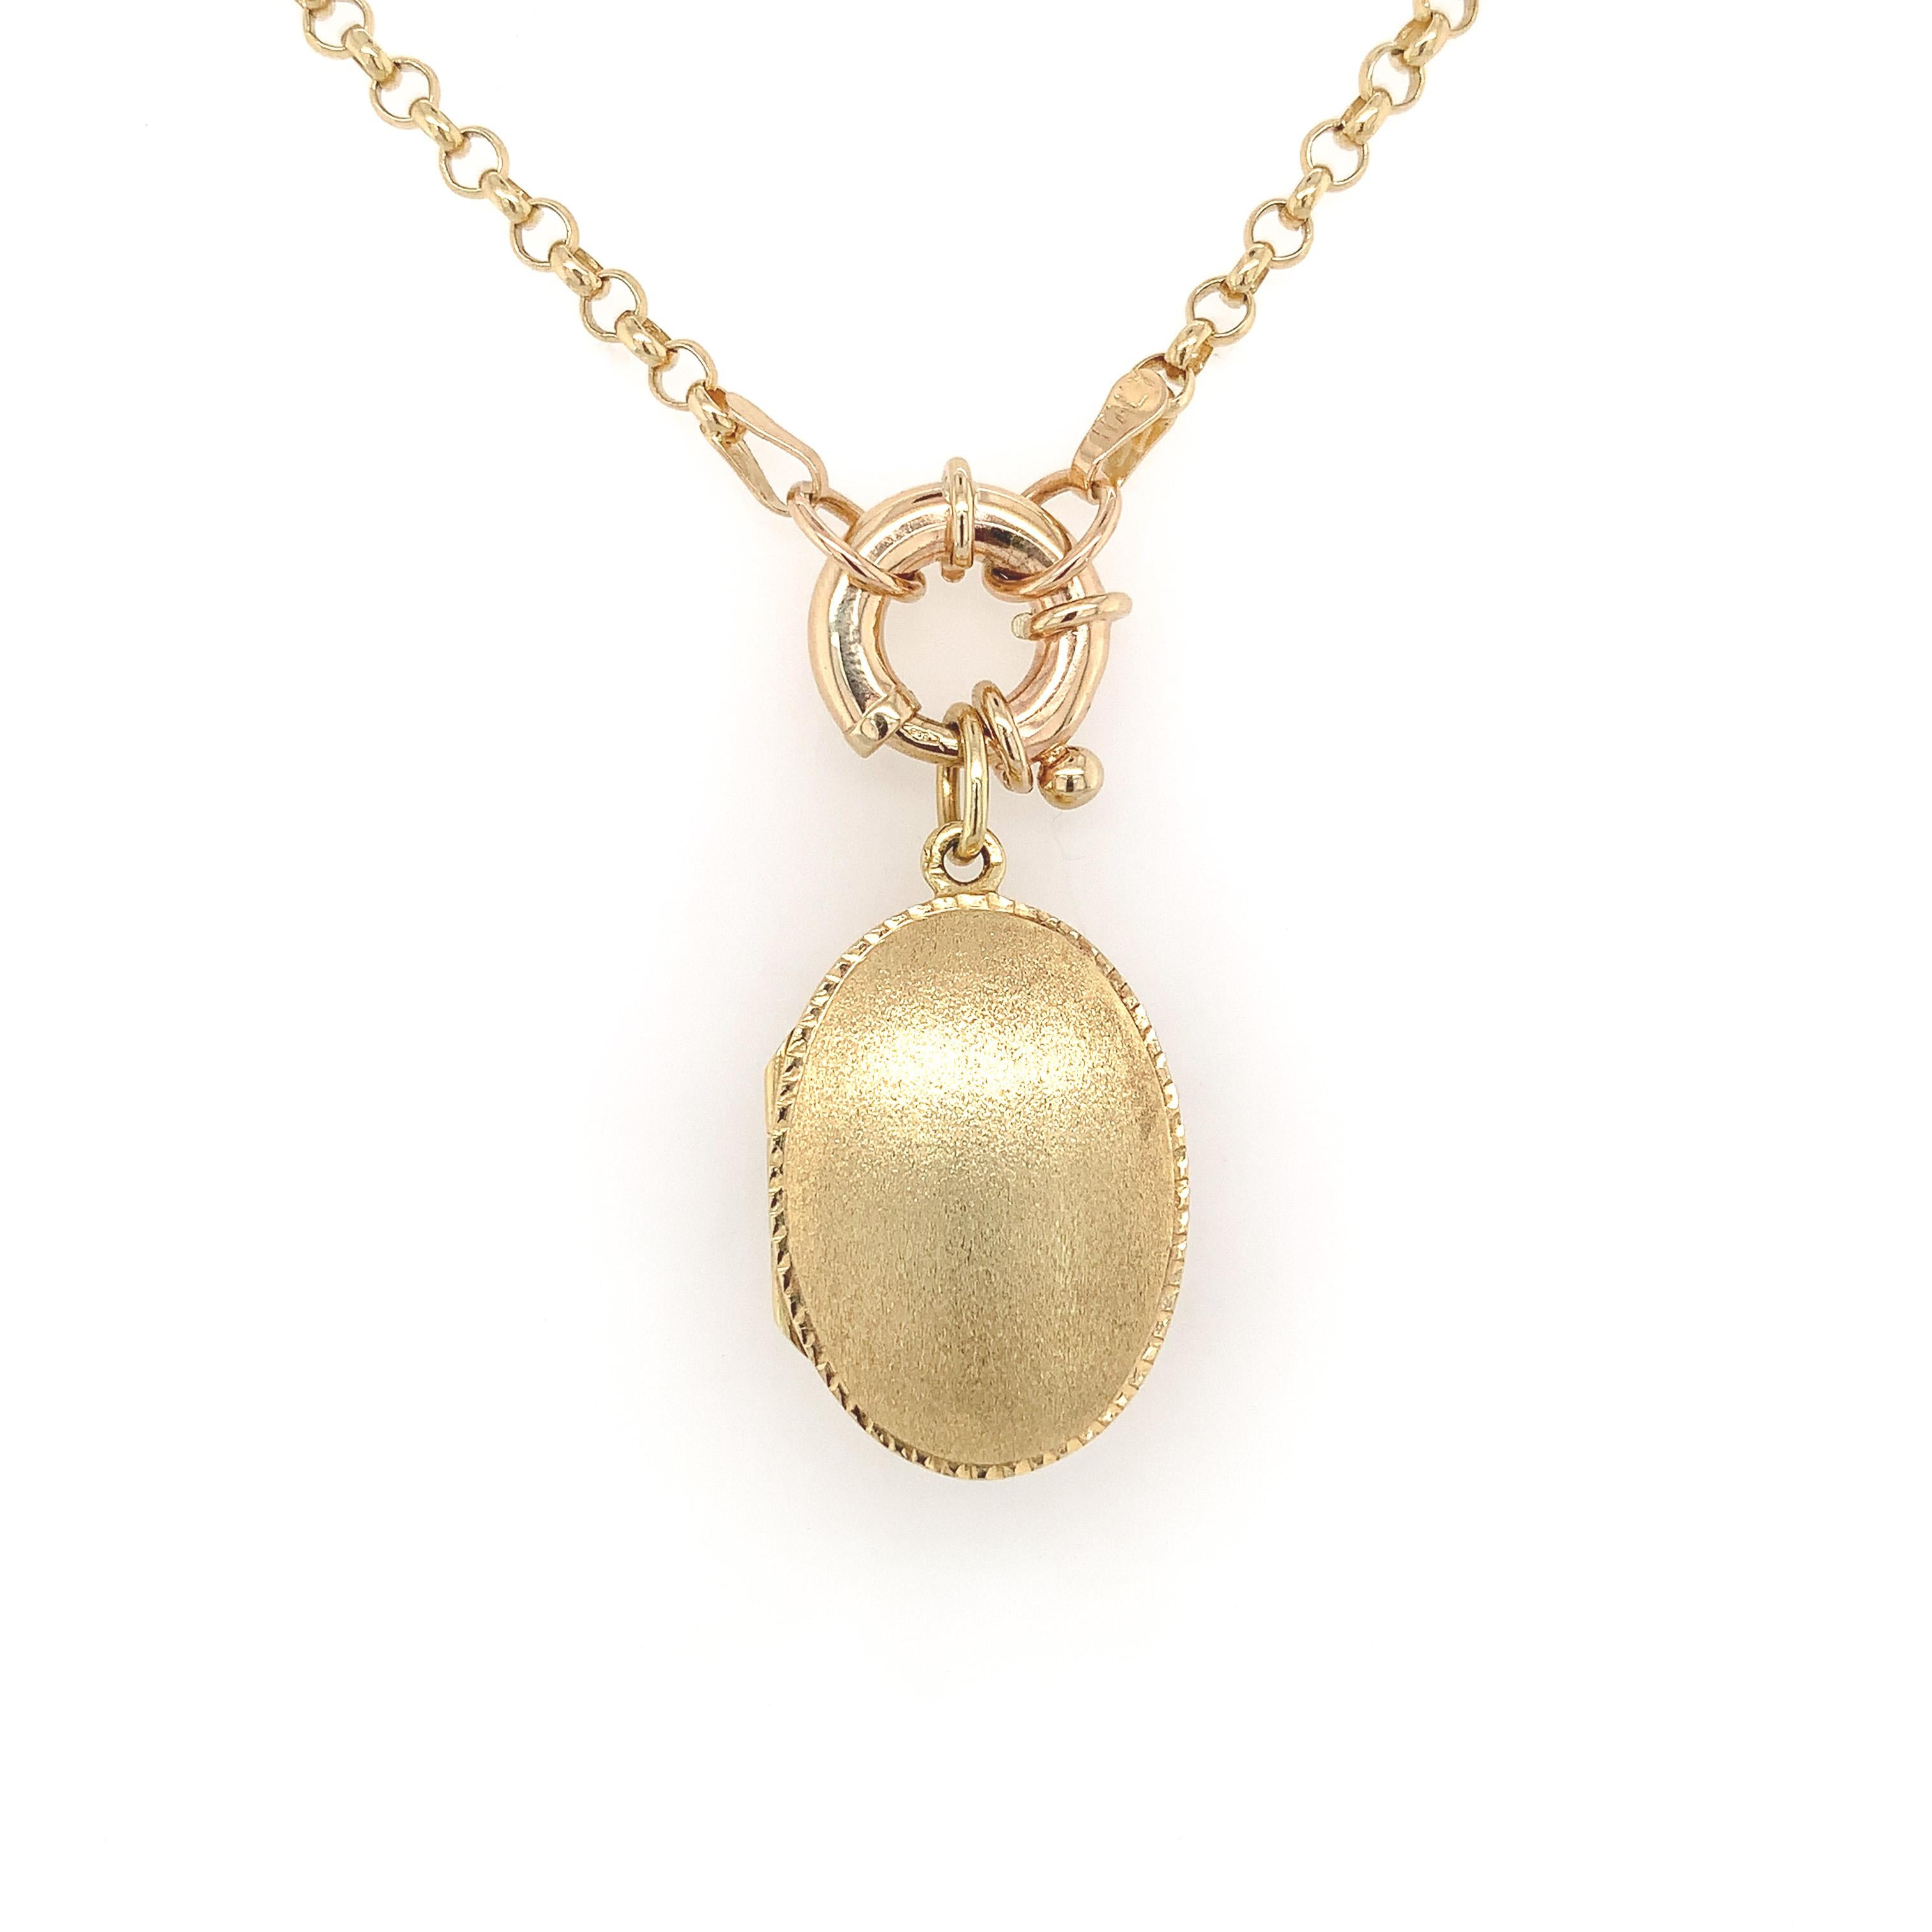 Contemporary 14K Yellow Gold Oval Locket with Decorative Heavy Chain For Sale